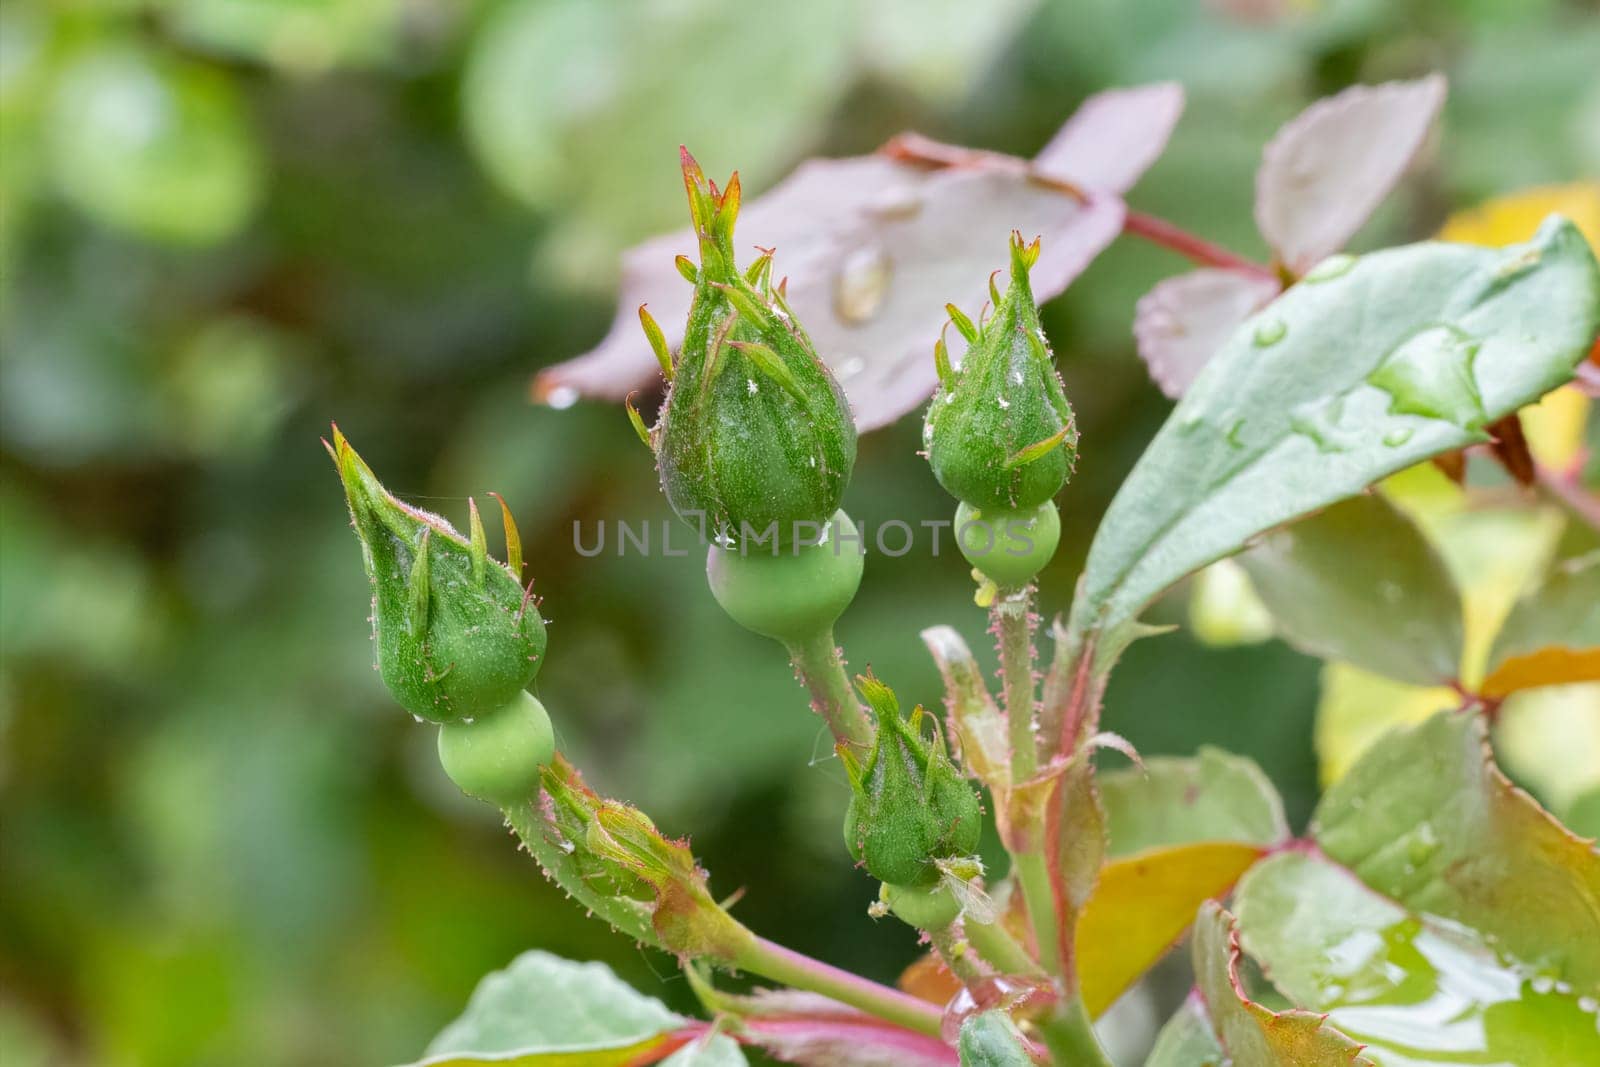 Rose buds on long stems with leaves in the garden. Shallow depth of field.